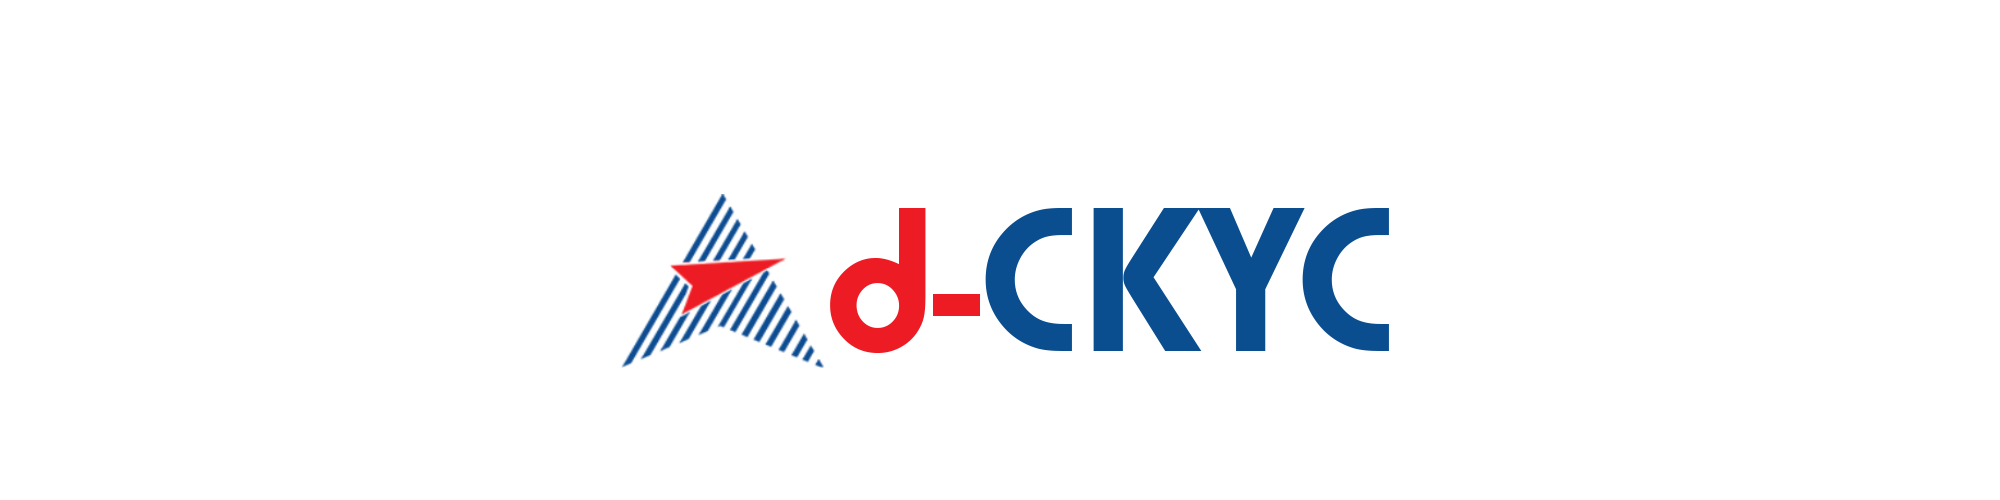 Ad-CKYC (Central Know Your Customer)